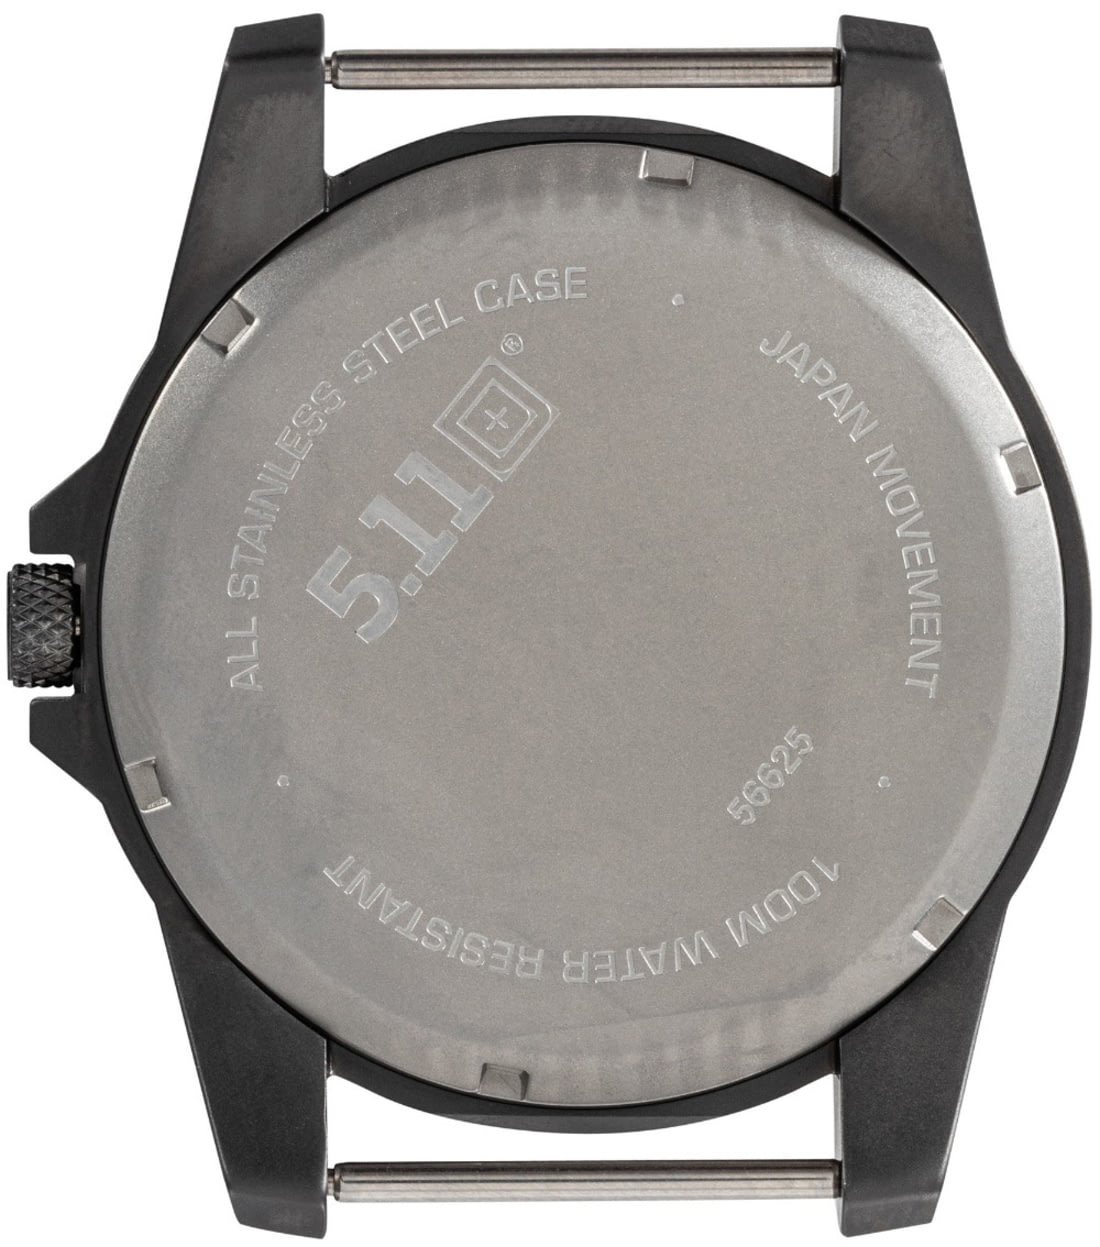 5 11 Tactical Field Watch 2 0 Up To 10 00 Off With Free Sandh — Campsaver